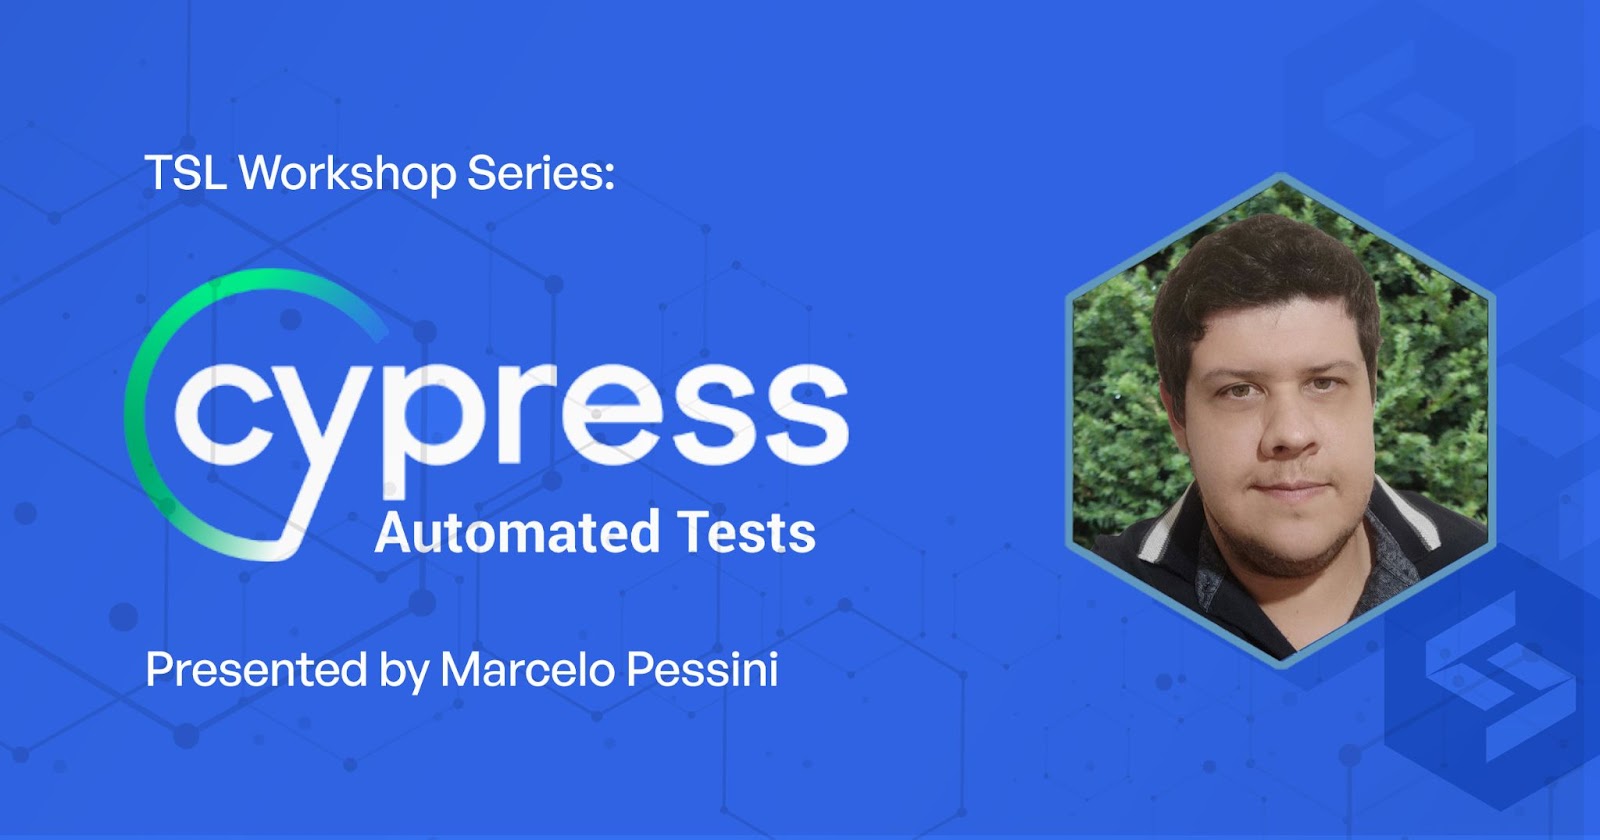 TSL Workshop Series: Cypress Automated Tests, presented by Marcelo Pessini